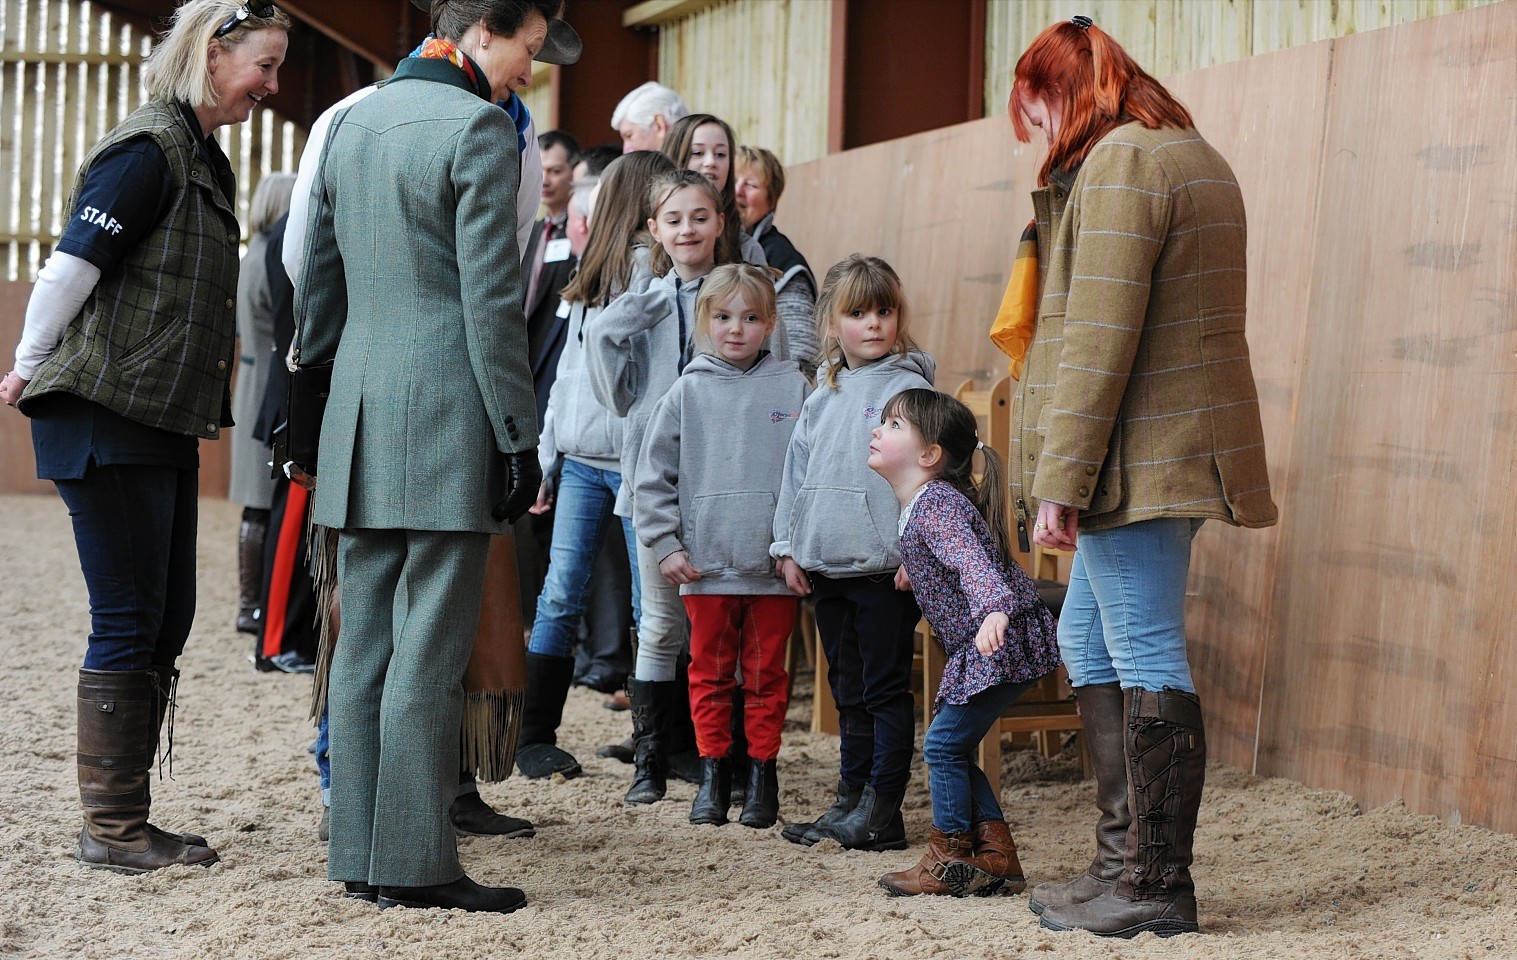 Princess Anne meets and greets the riders